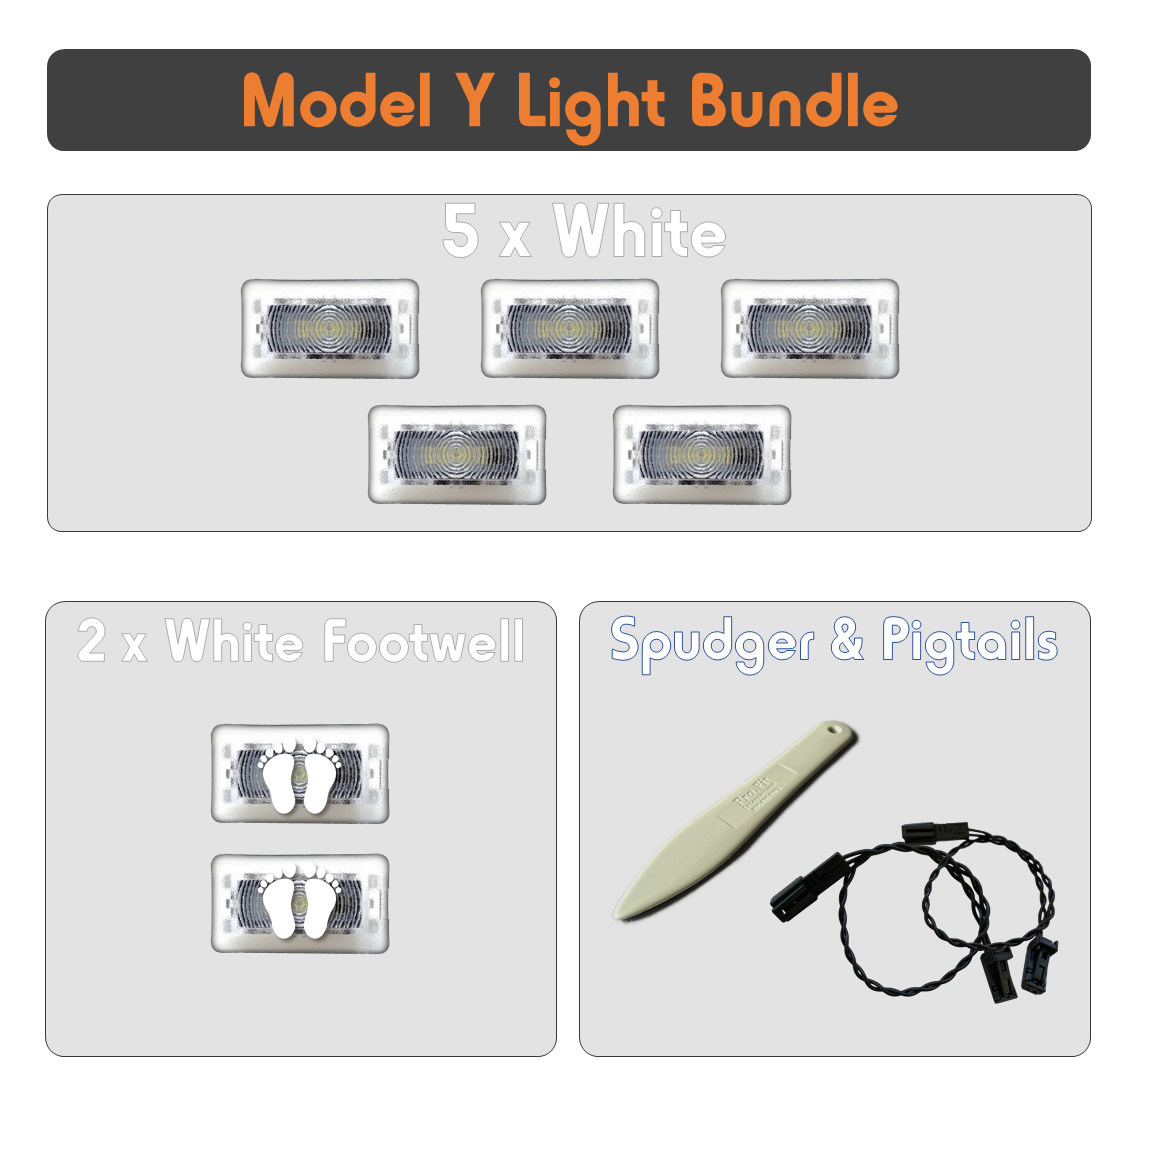 per Accurate Ultra-Bright Light Bundles for All Teslas